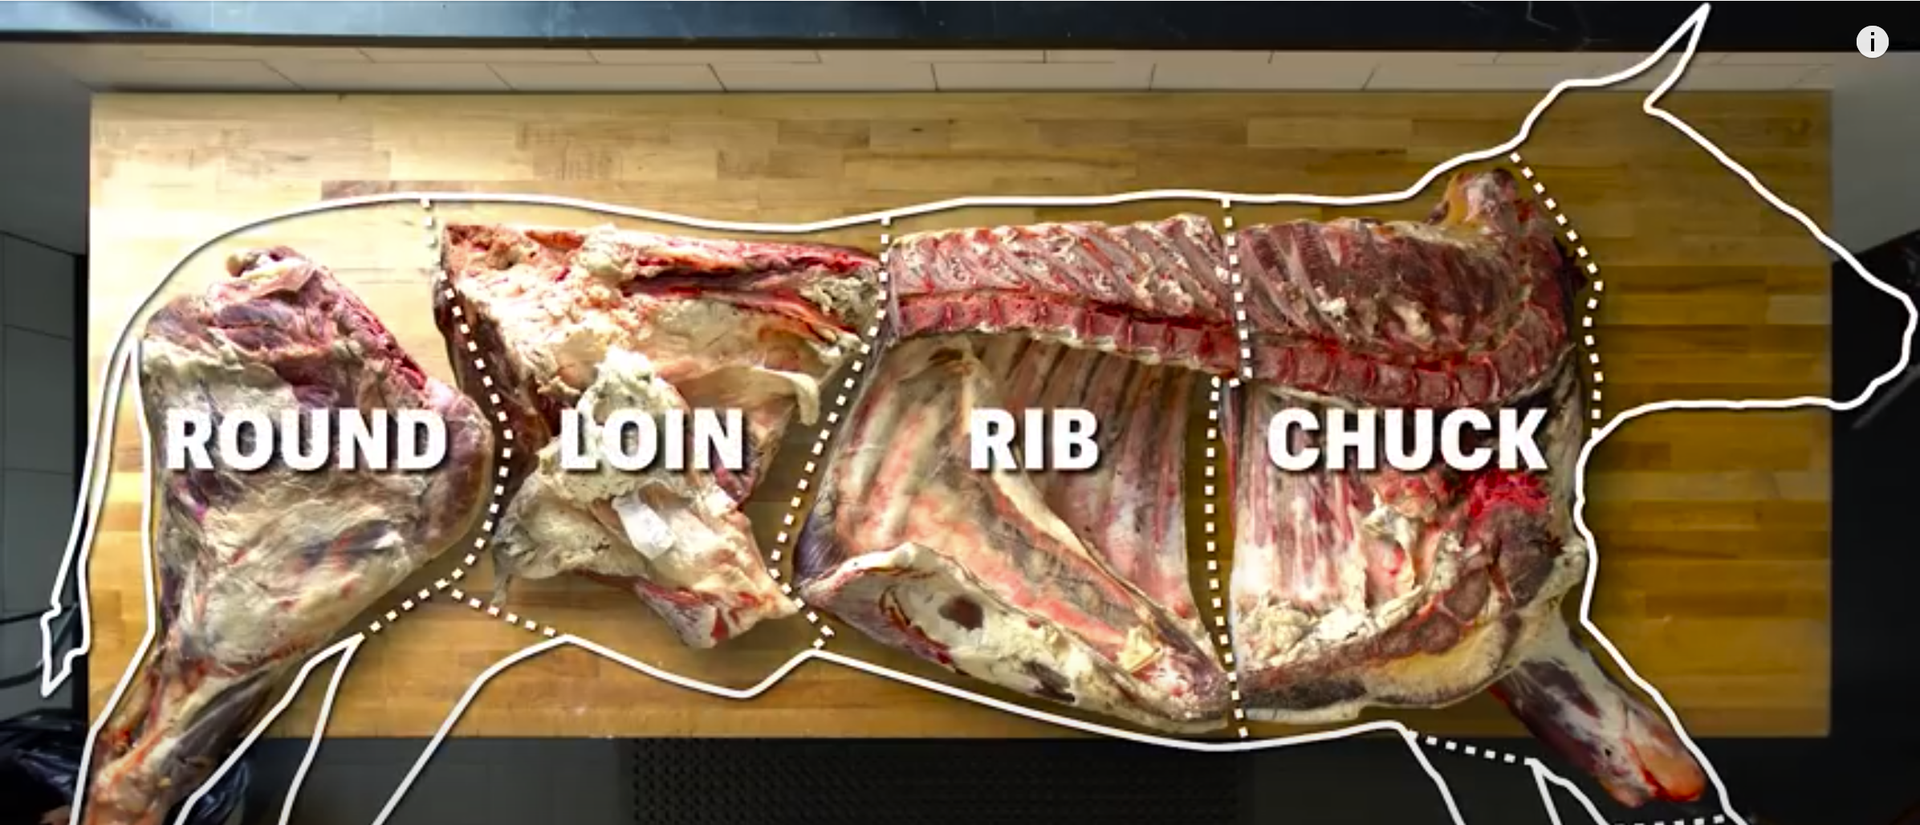 How To Butcher An Entire Cow: Every Cut Of Meat Explained